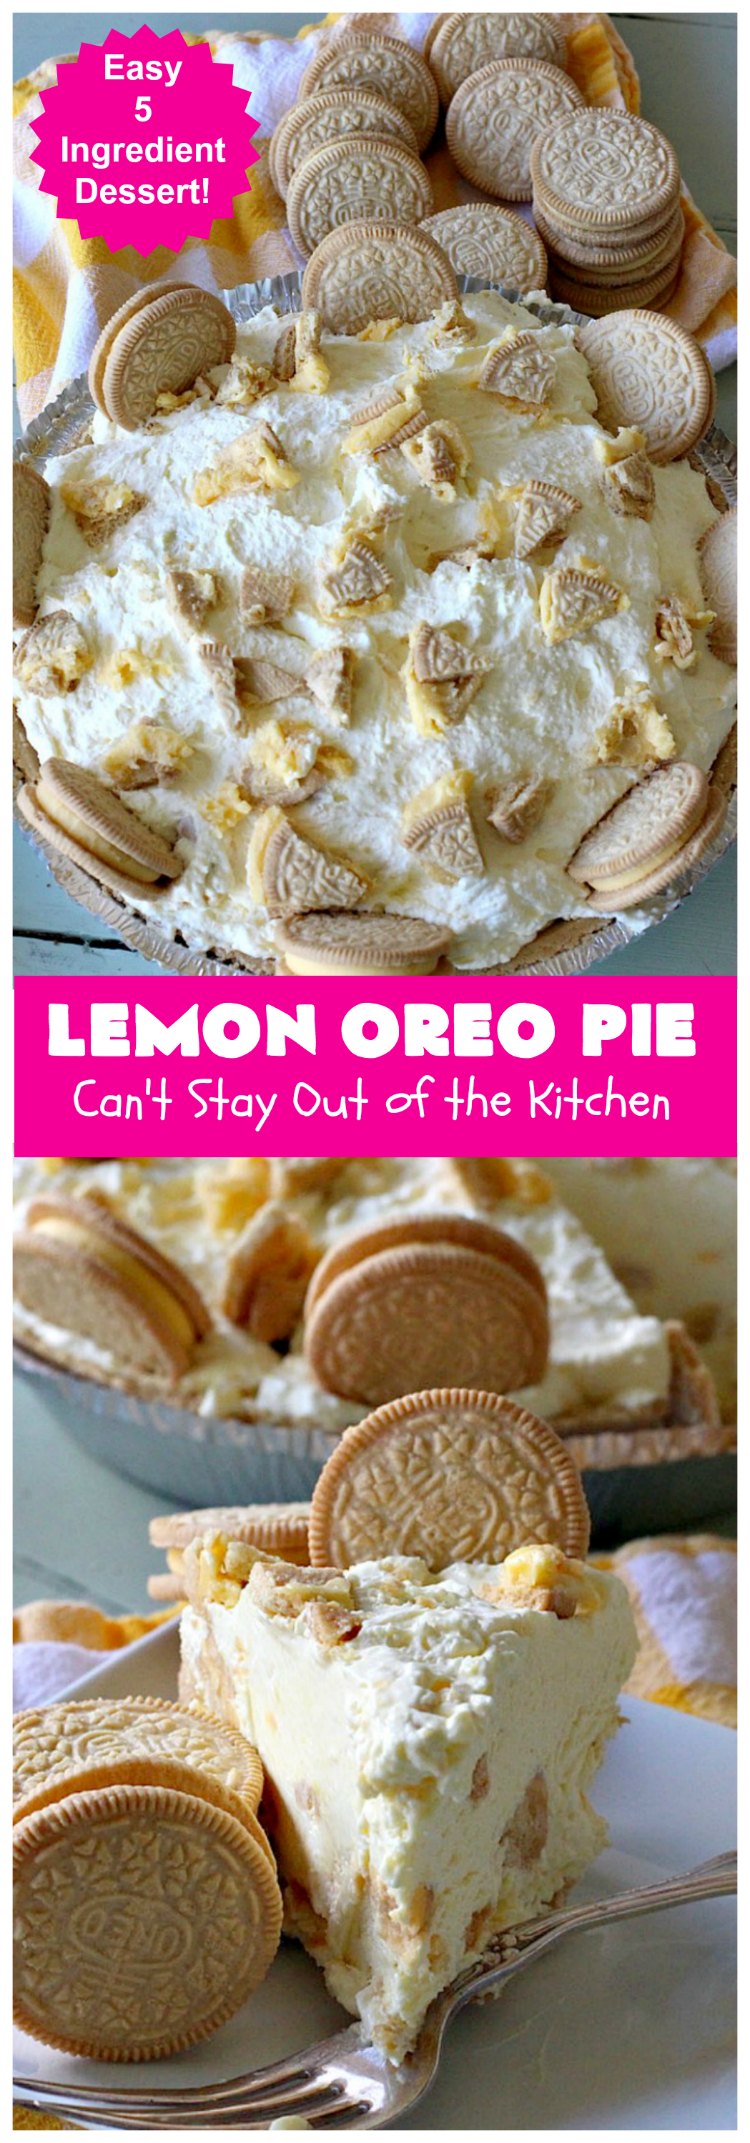 Lemon Oreo Pie | Can't Stay Out of the Kitchen